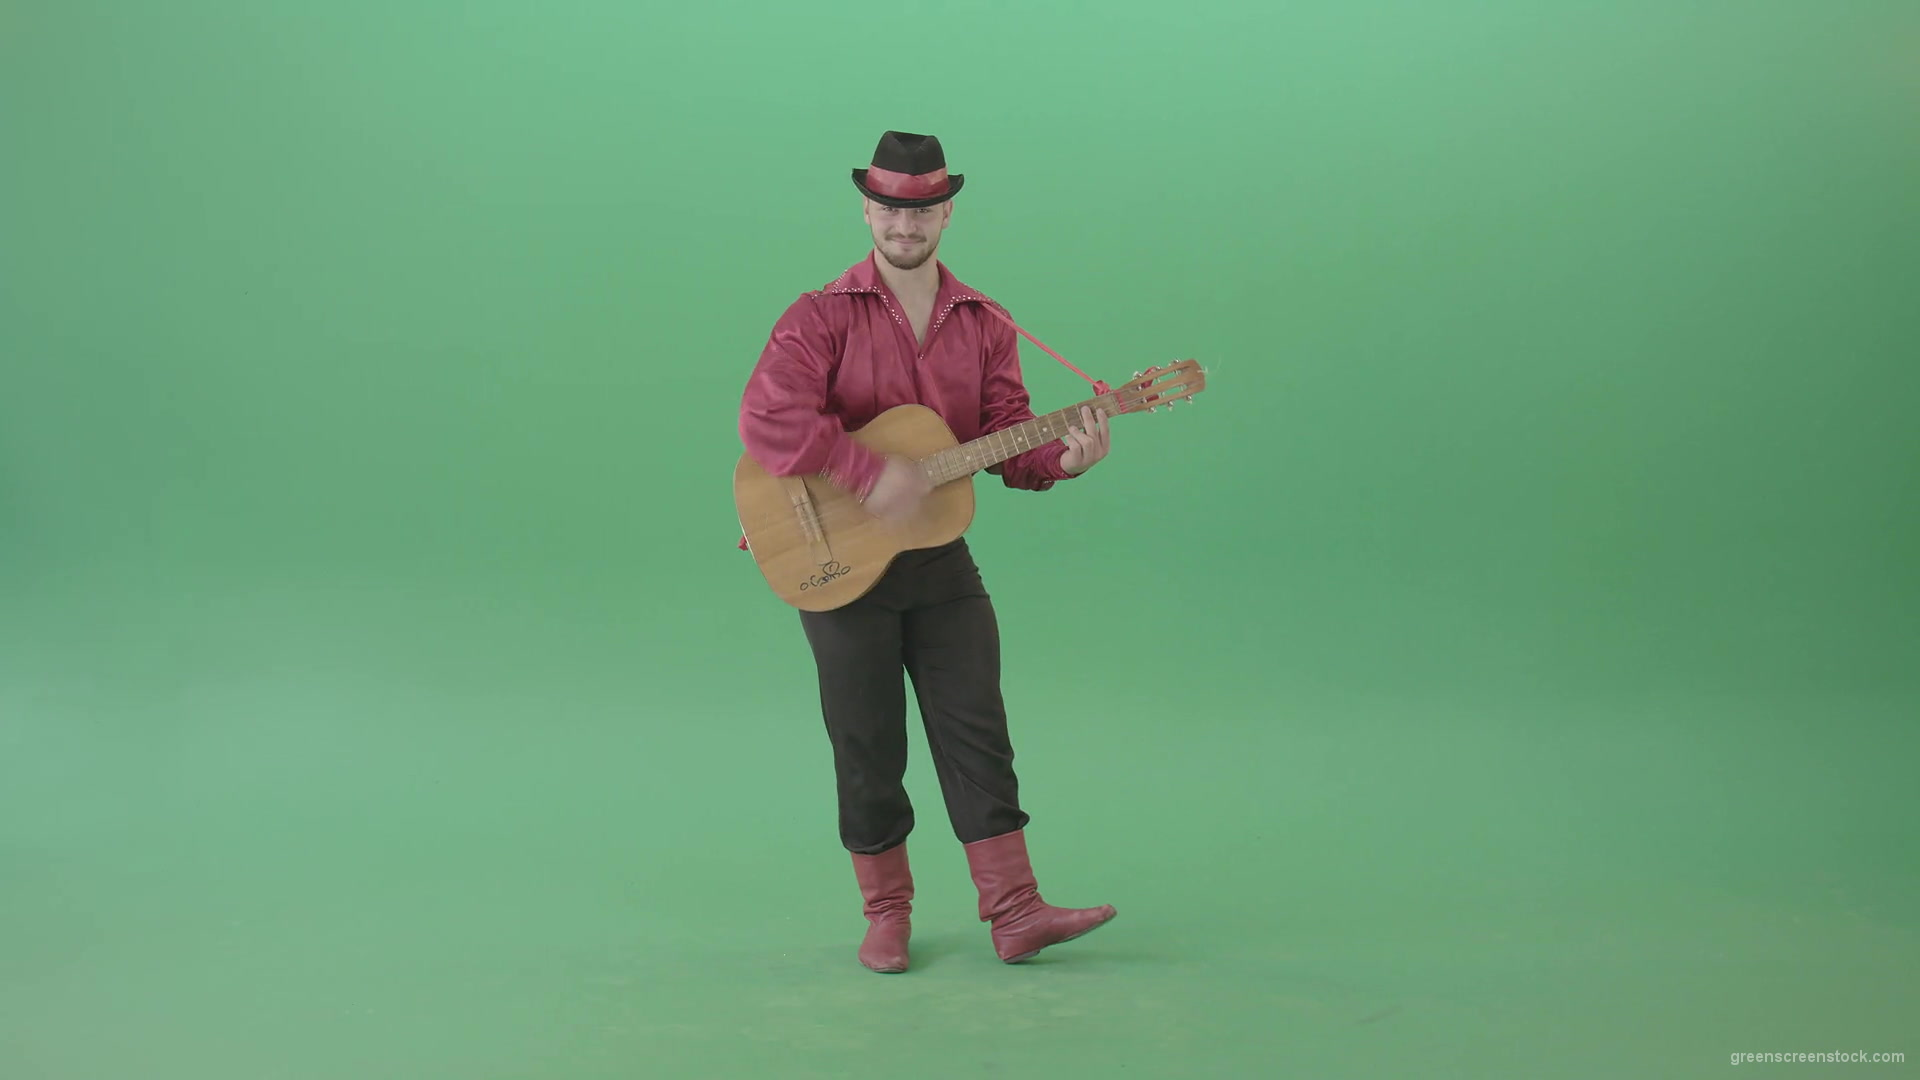 Balkan-Gipsy-man-in-red-shirt-playing-guitar-isolated-on-green-screen-4K-Video-Footage-1920_005 Green Screen Stock